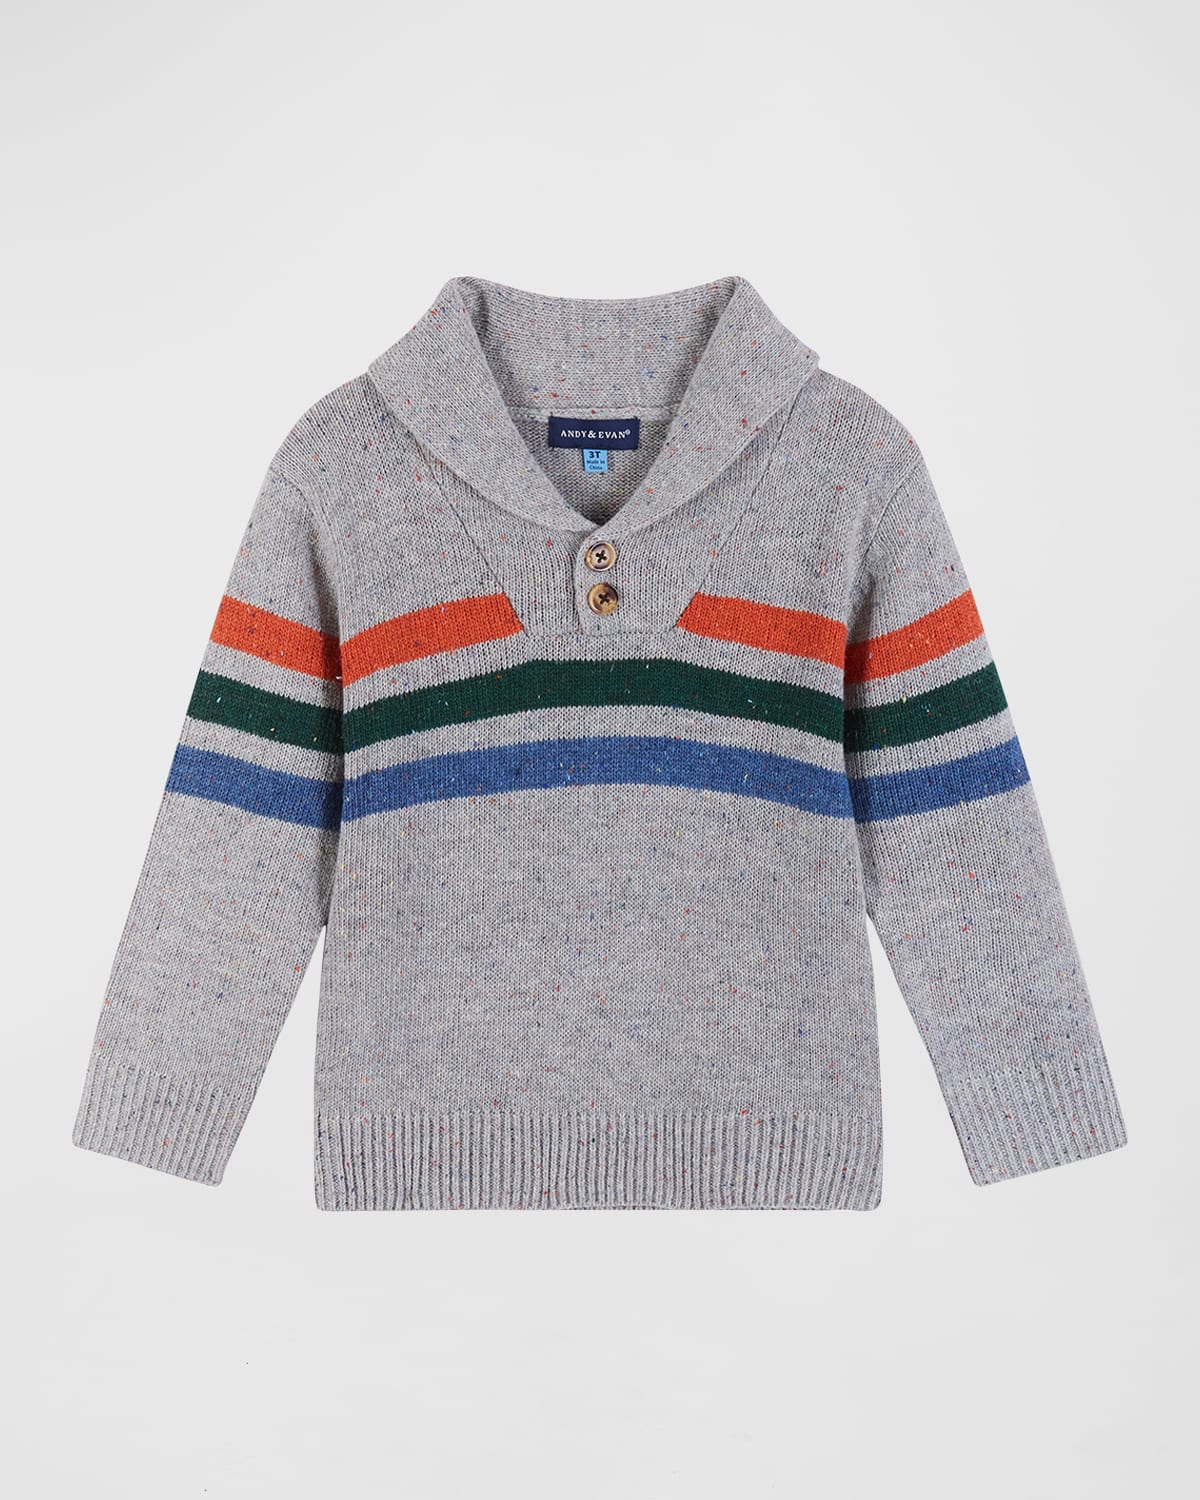 Andy & Evan Kids' Toddler/child Boys Striped Button Sweater In Grey Stripe